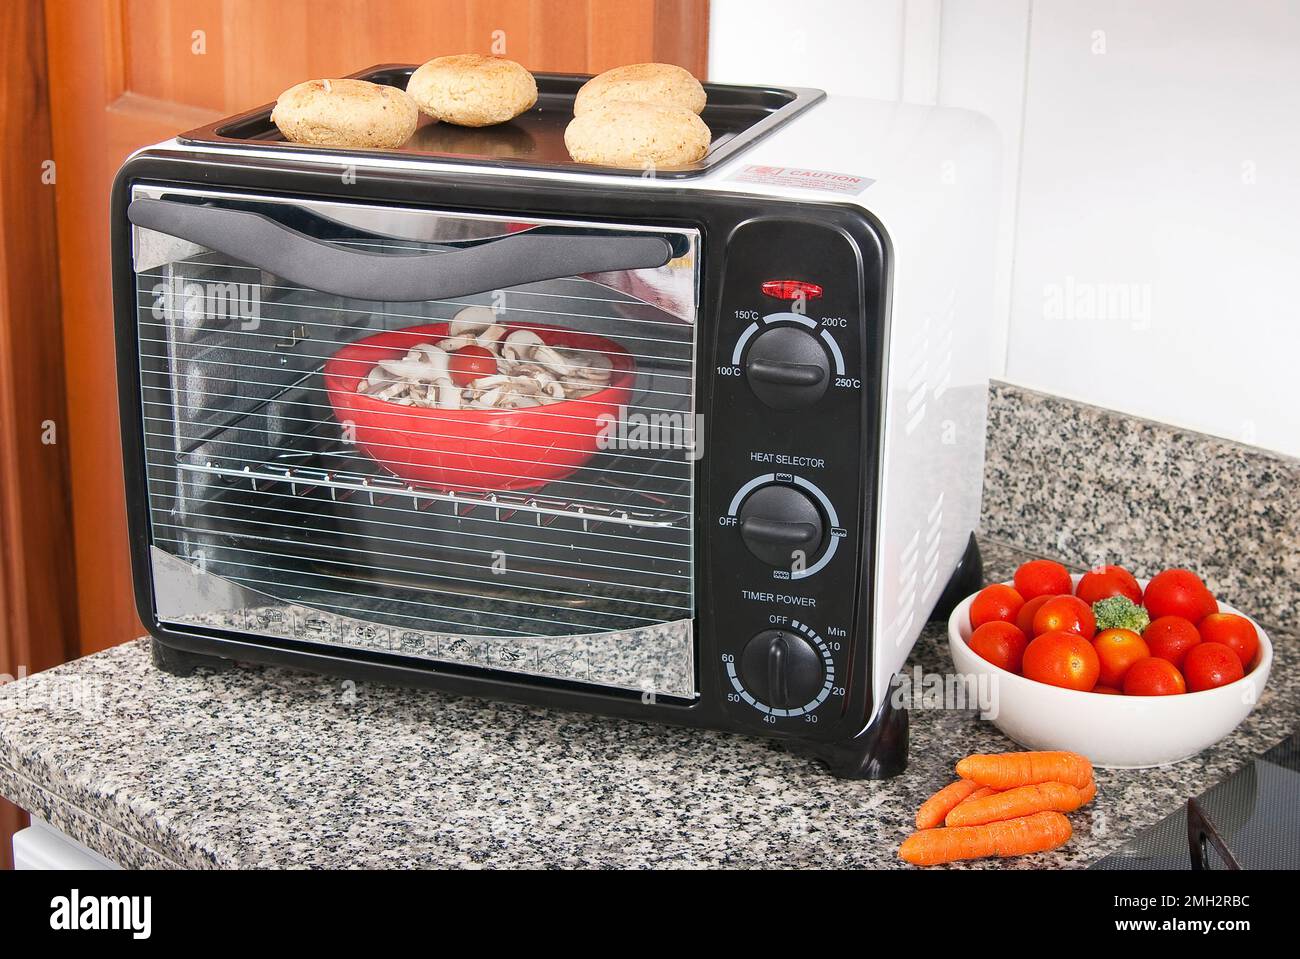 Household appliance; toaster oven, photo in kitchen environment. Stock Photo